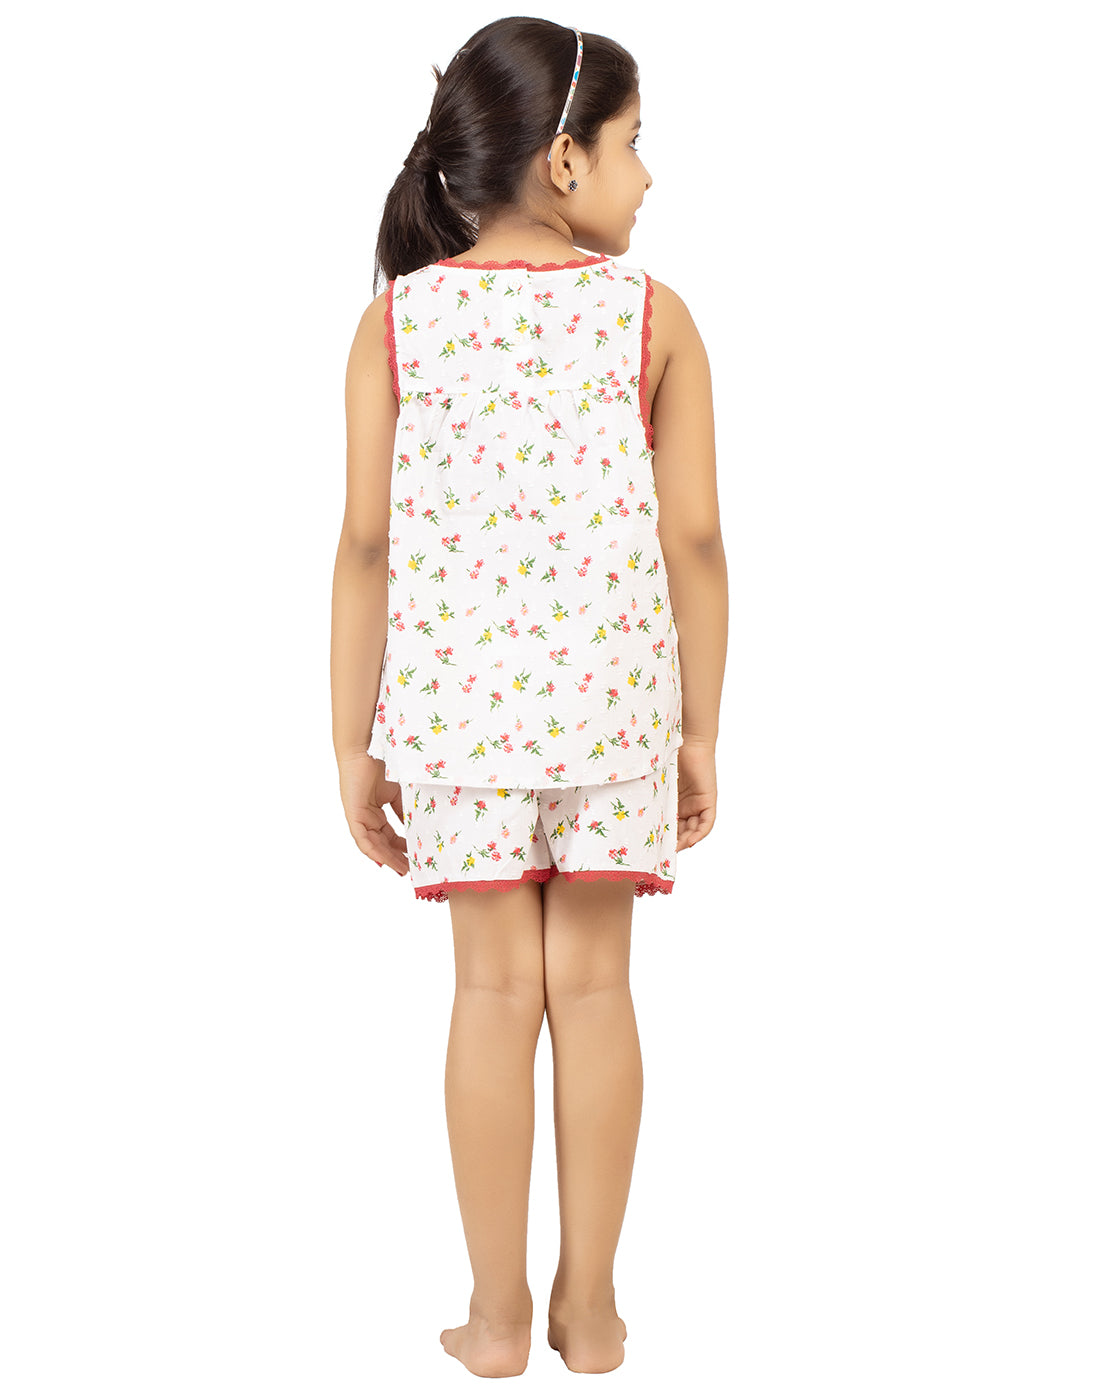 Night Suit Shorty Set for Girls-Ditsy Floral